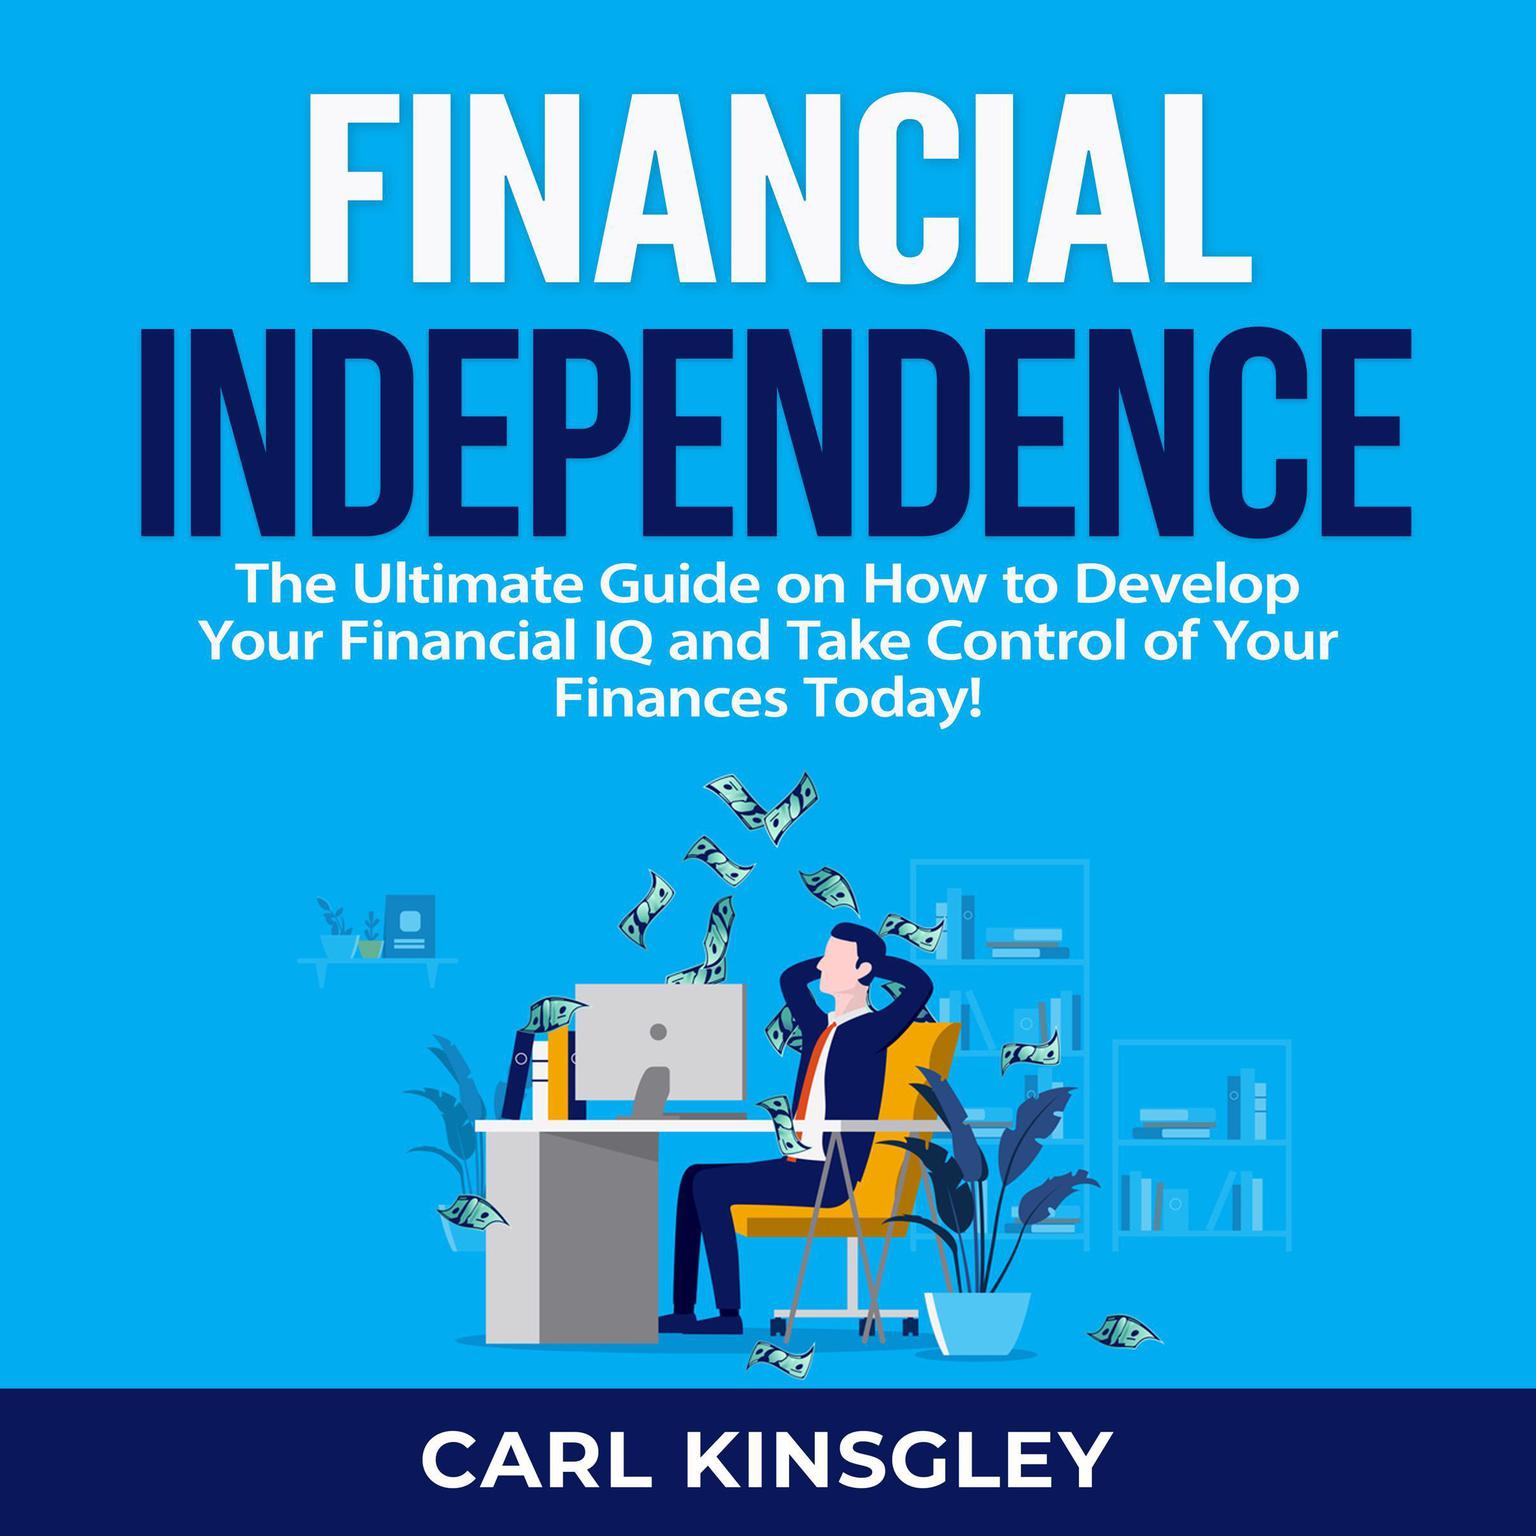 Financial Independence: The Ultimate Guide on How to Develop Your Financial IQ and Take Control of Your Finances Today! Audiobook, by Carl Kinsgley